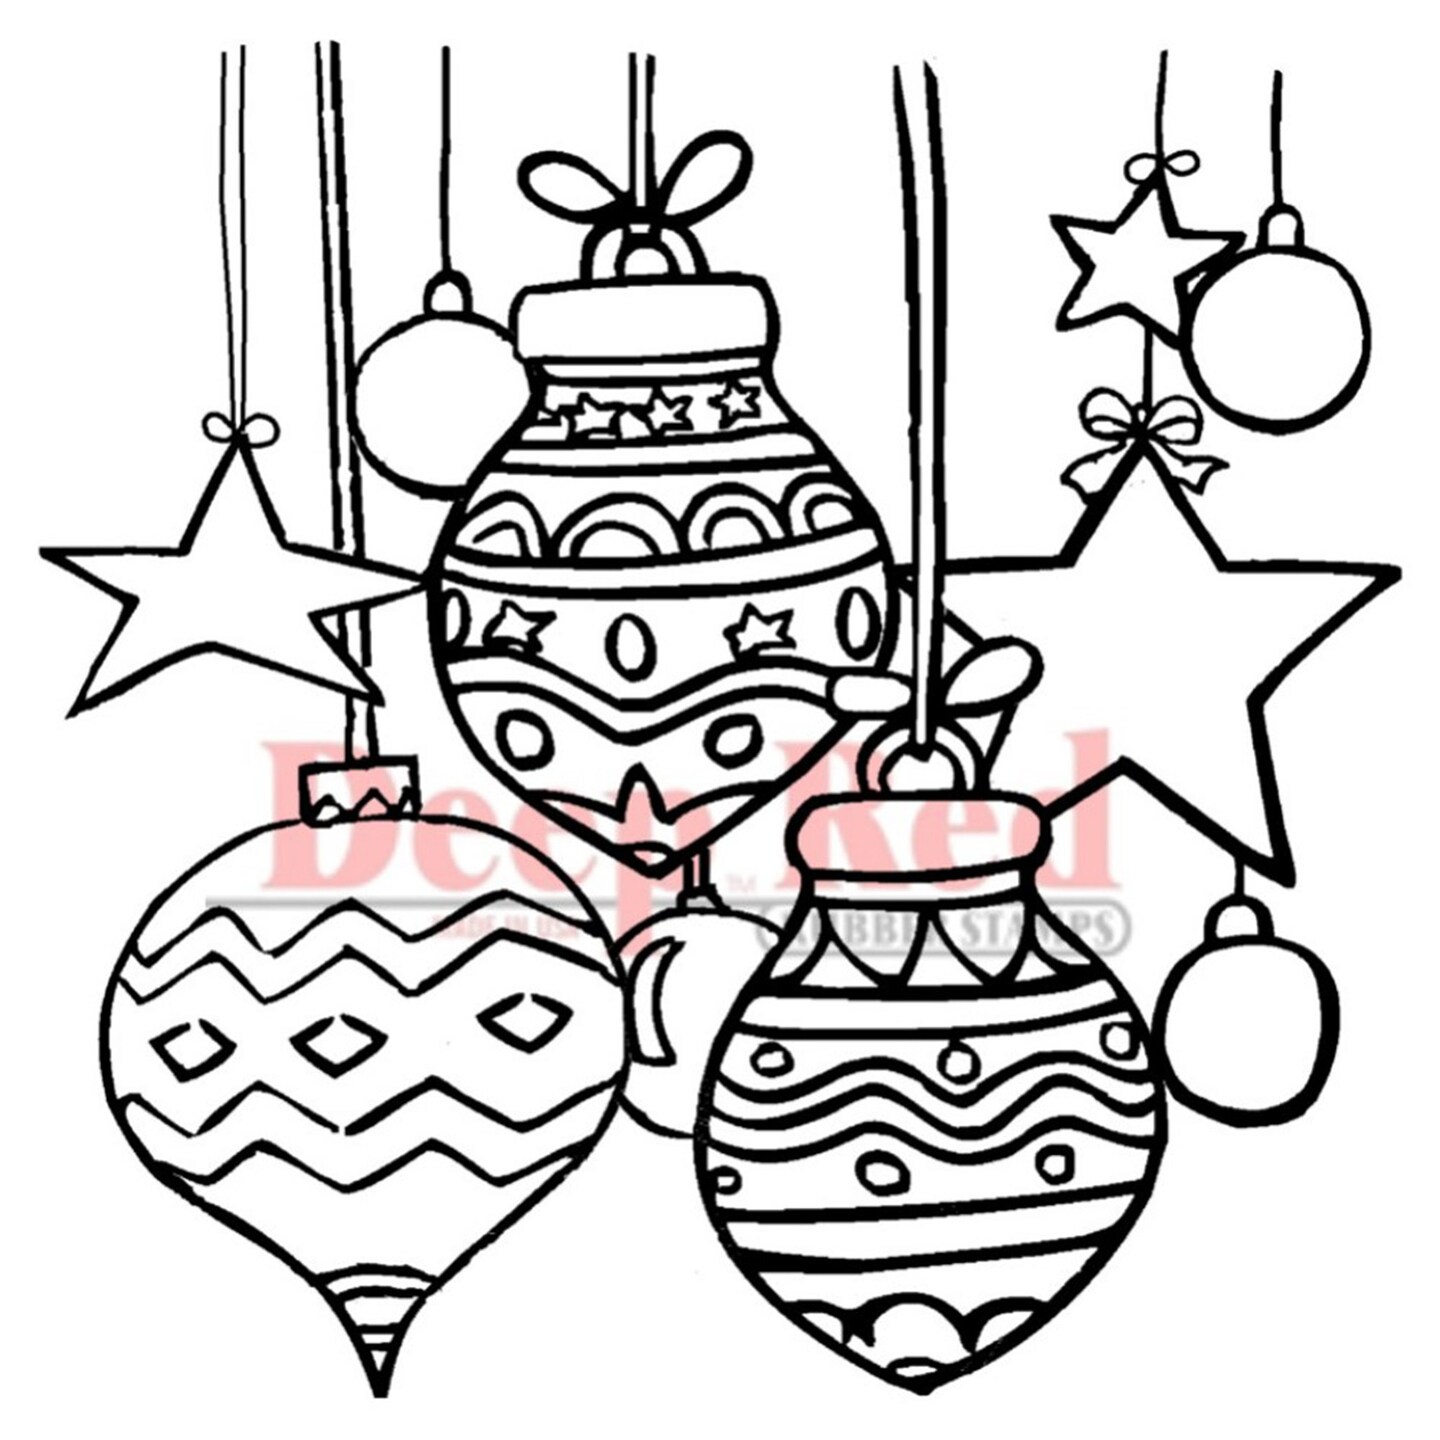 Deep Red Stamps Christmas Stars and Balls Rubber Cling Stamp 3.1 x 3 inches